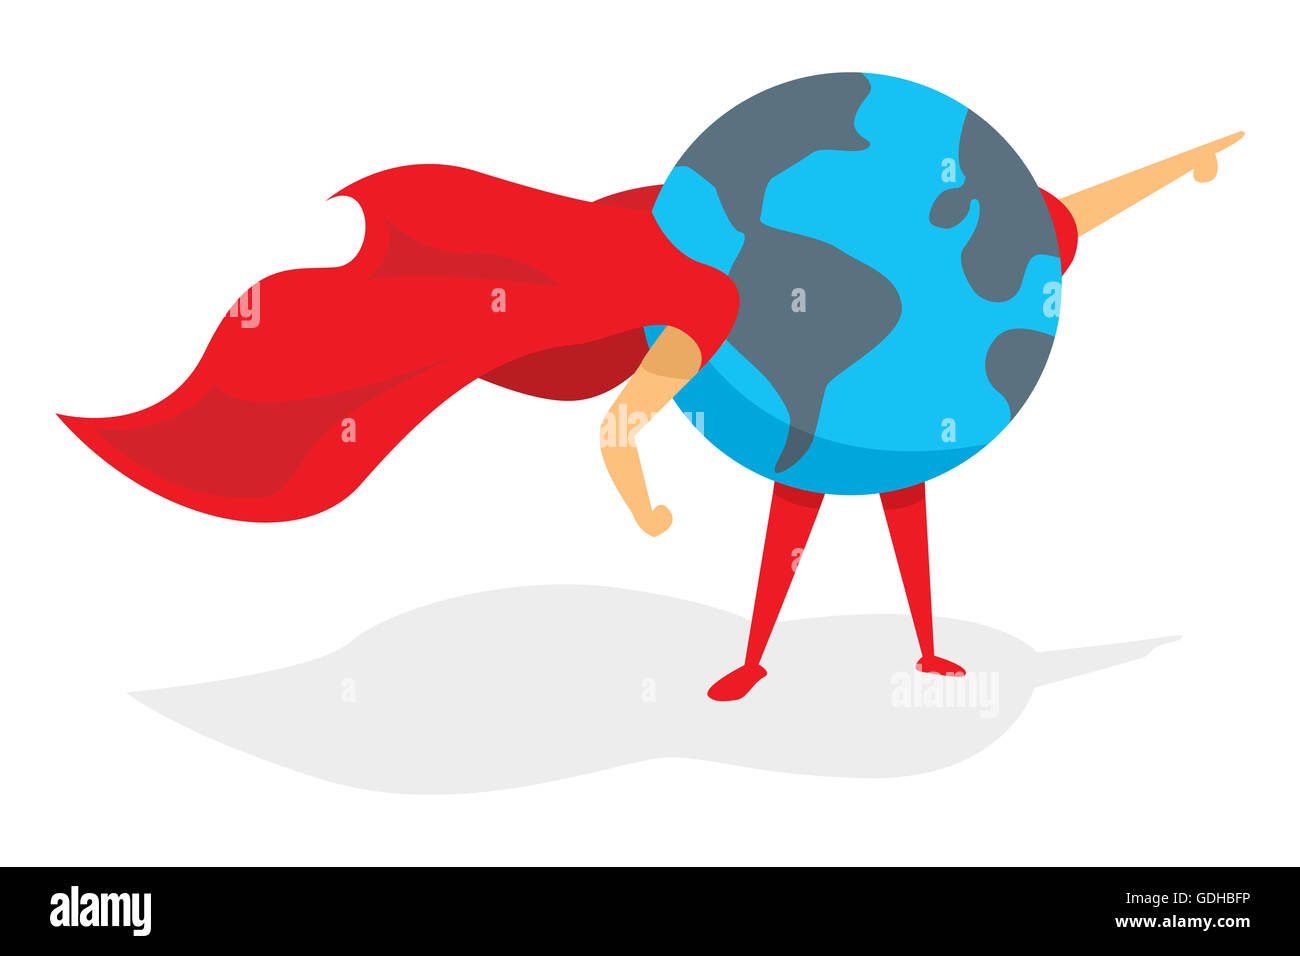 Cartoon illustration of planet earth super hero standing with cape Stock Photo